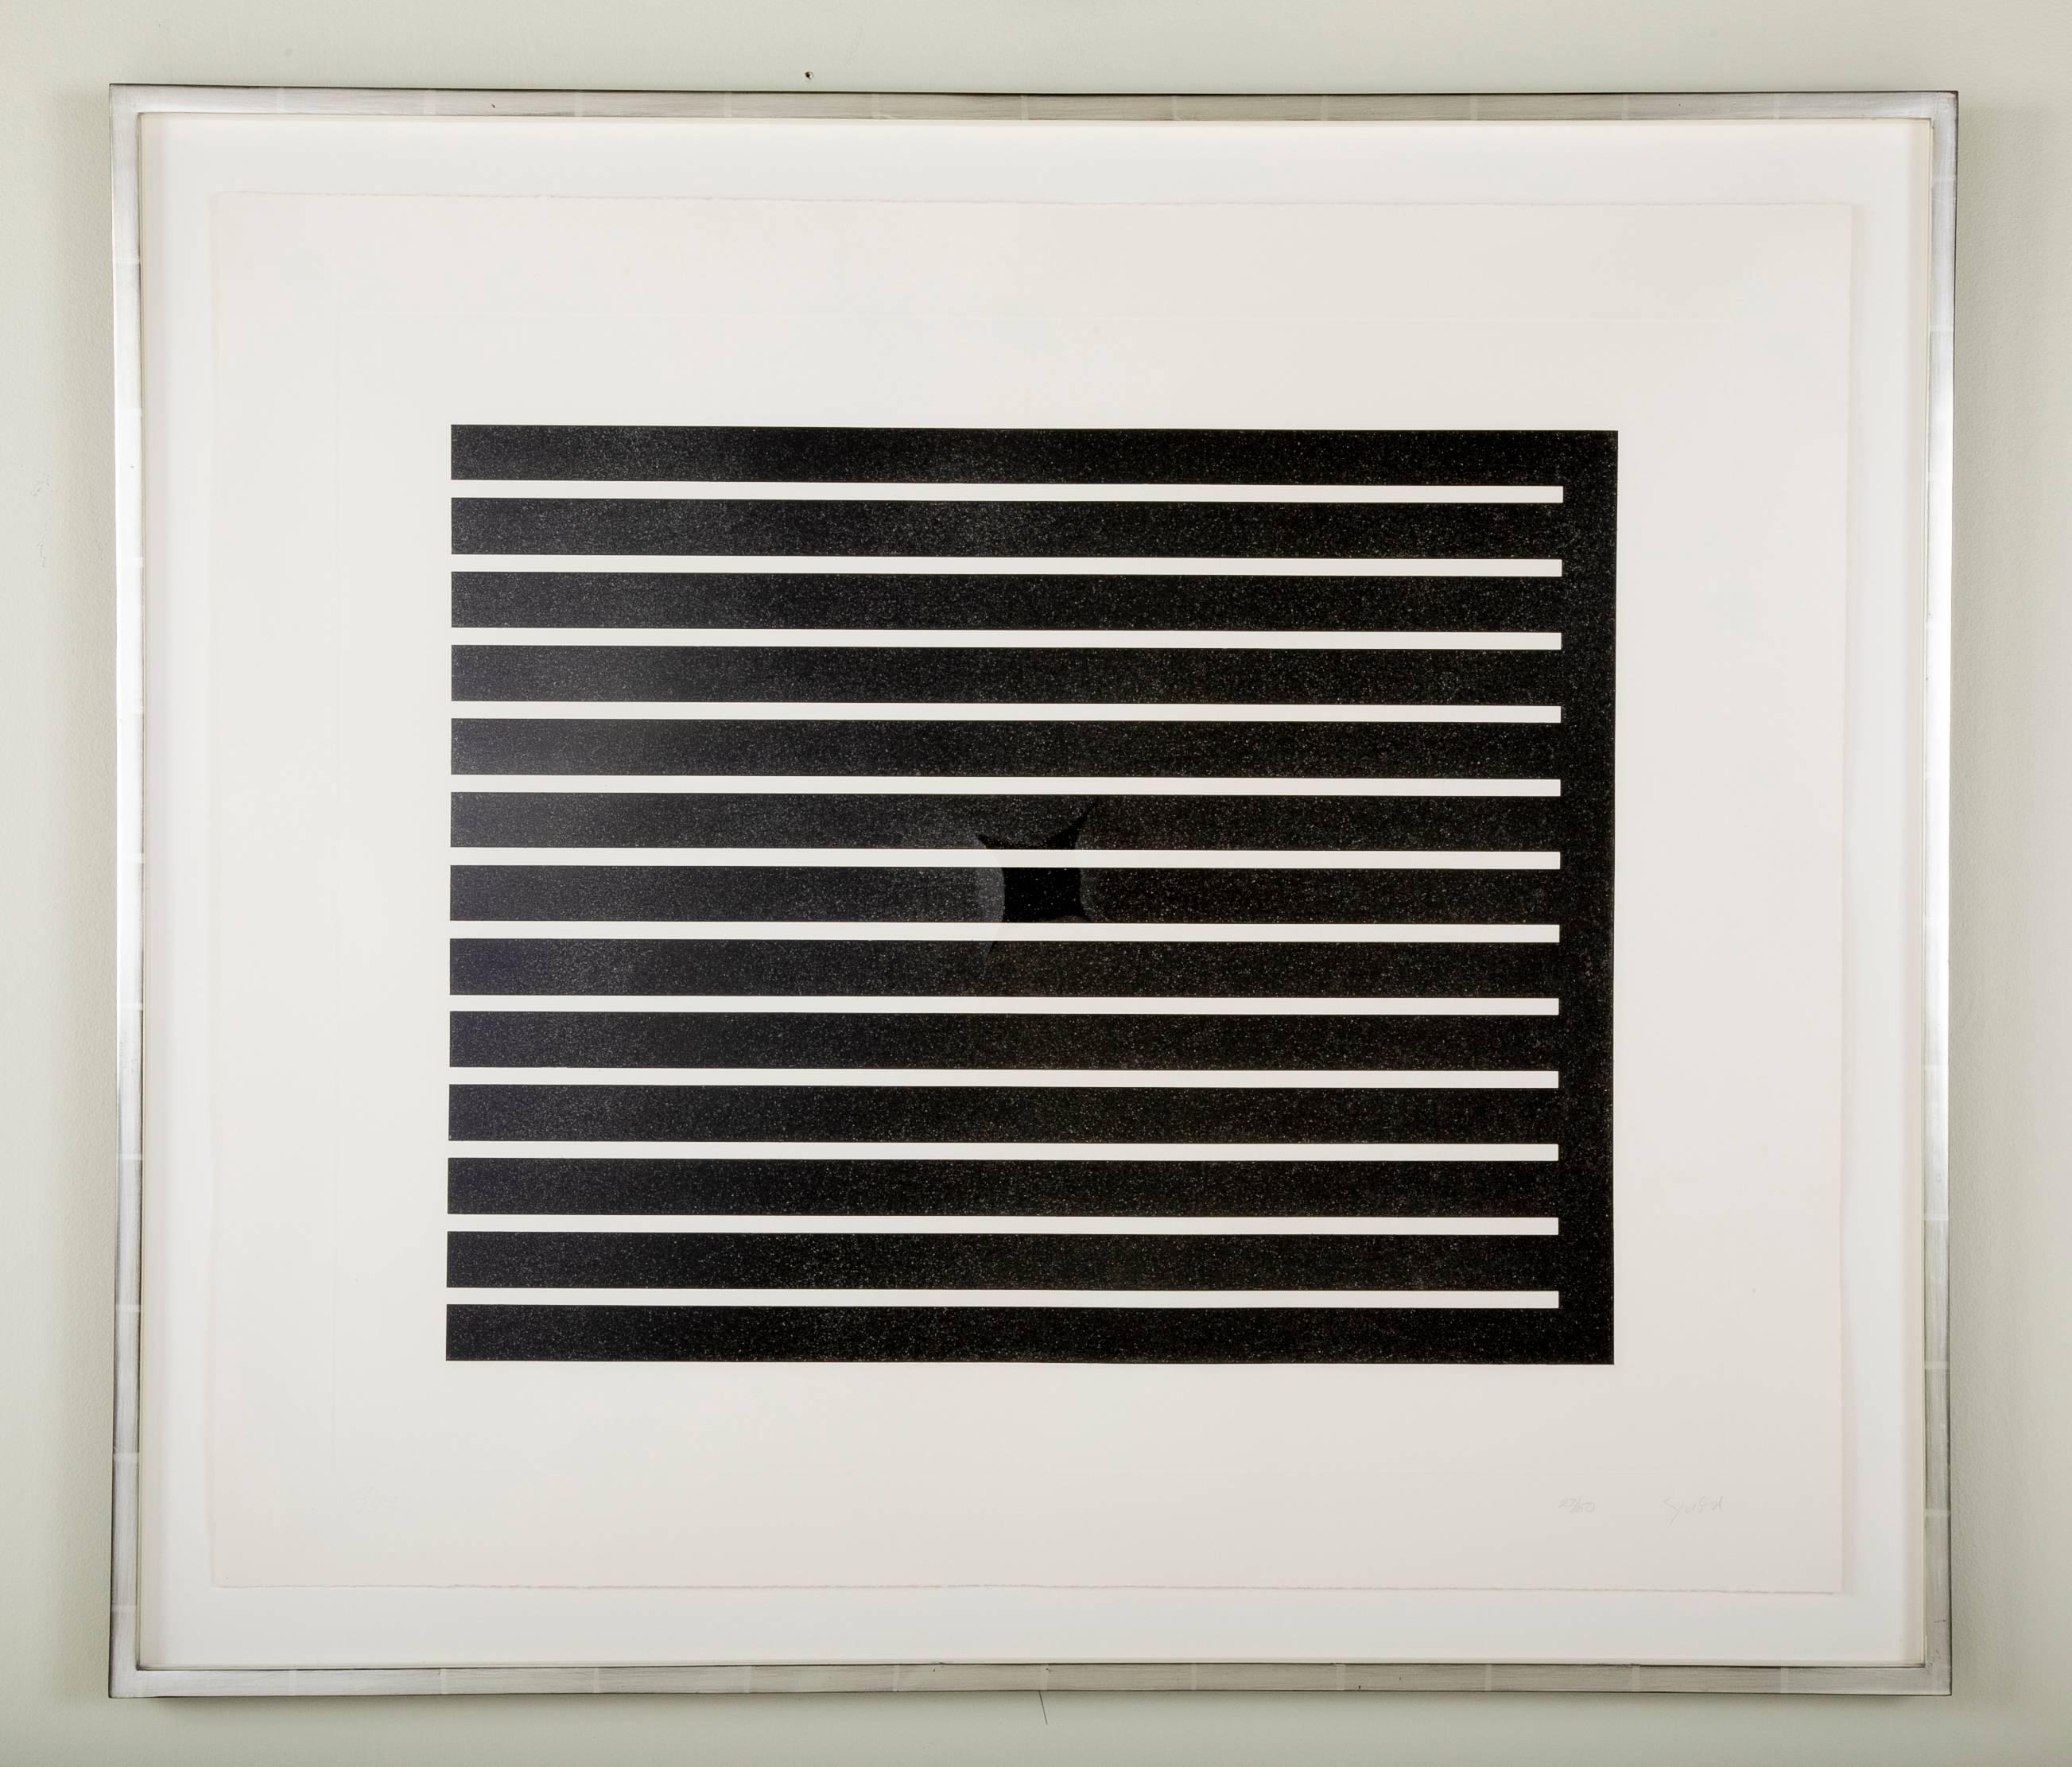 Late 20th Century Collection of Three Untitled Donal Judd Aquatint Prints Sold Individually